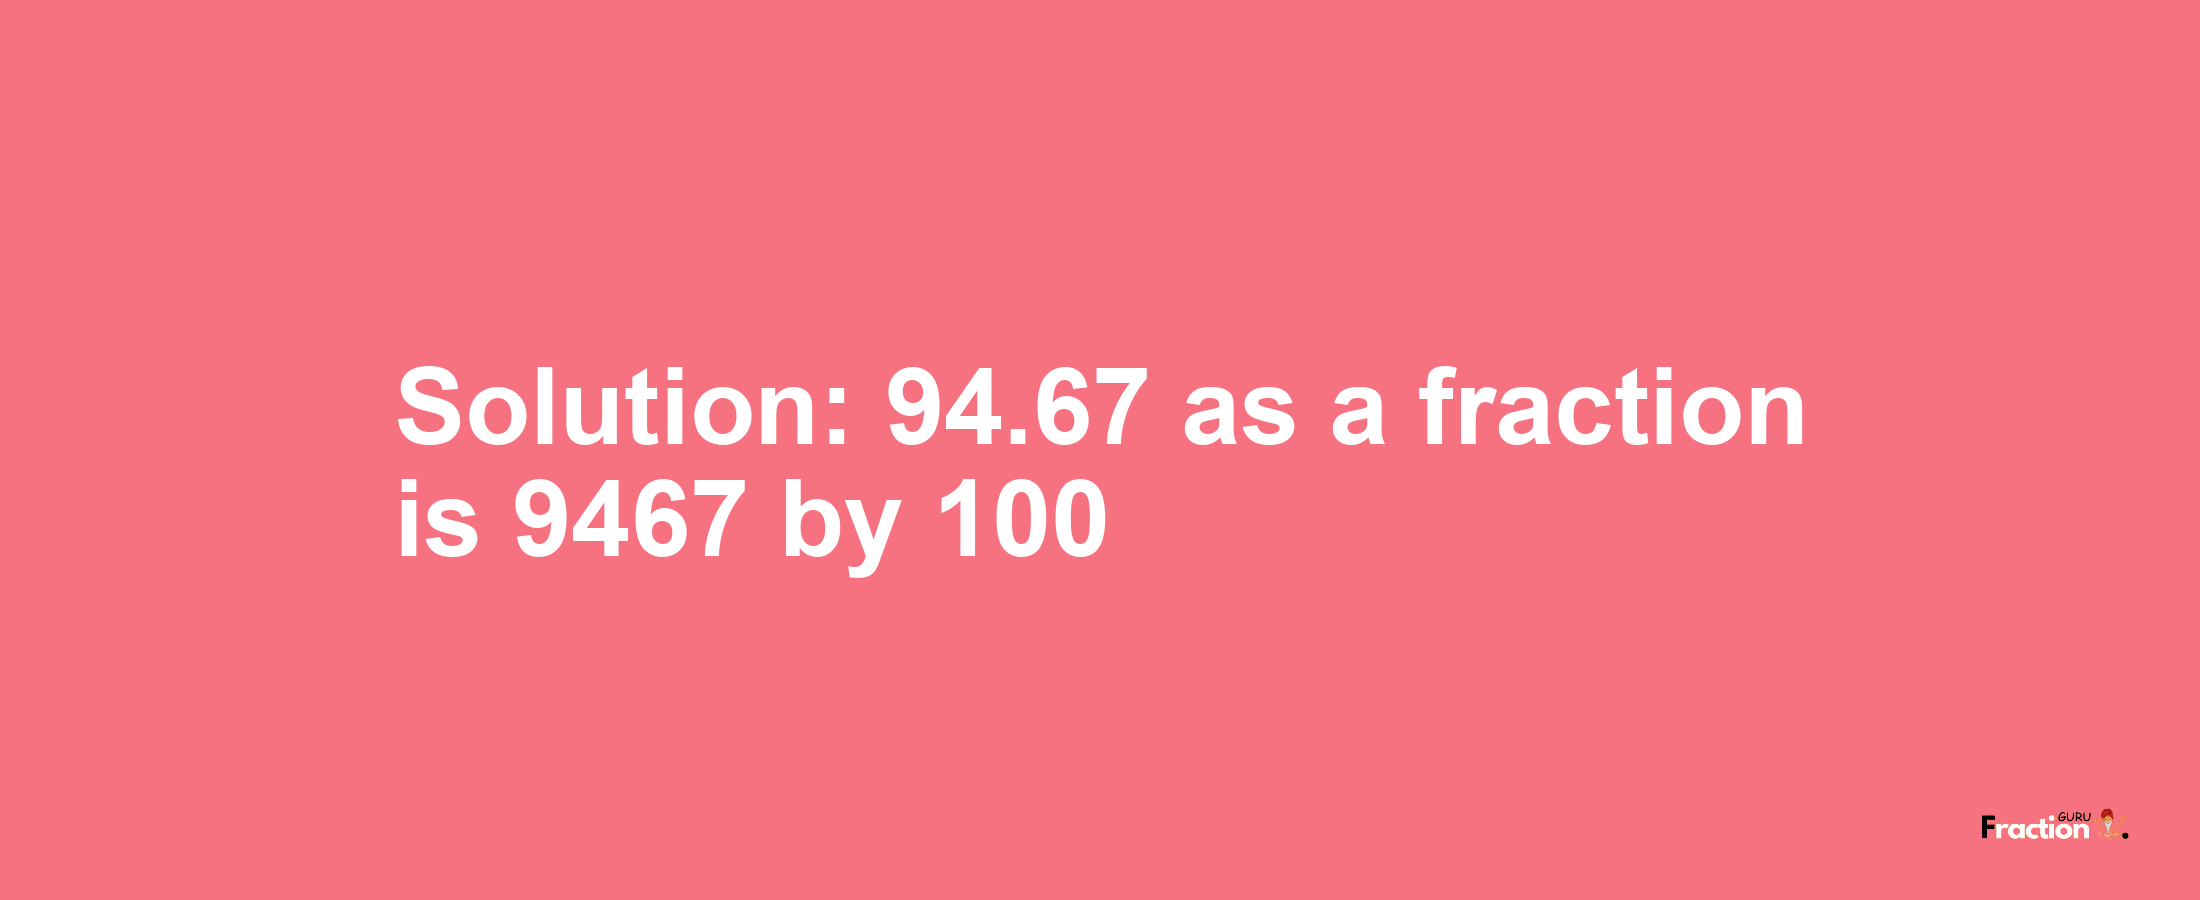 Solution:94.67 as a fraction is 9467/100